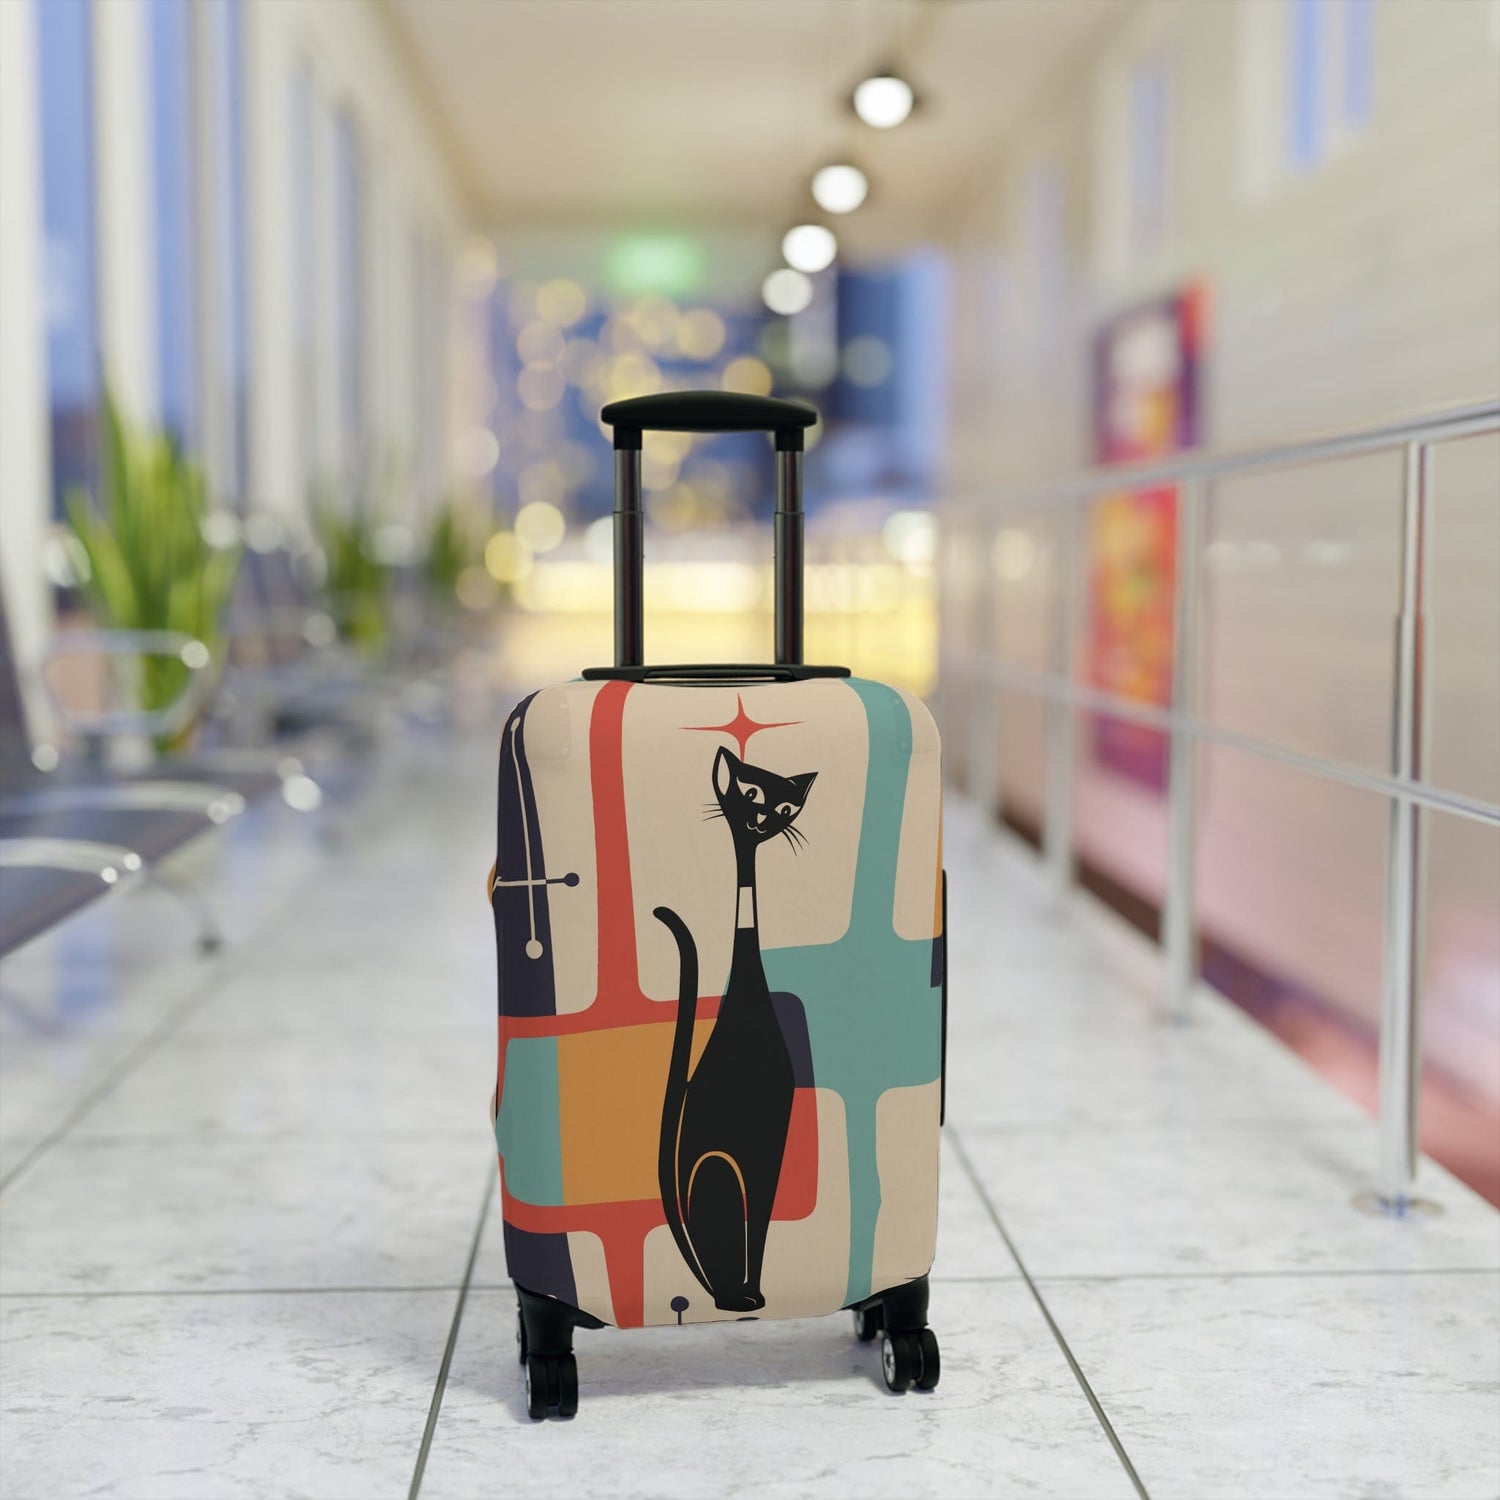 Printify Retro Atomic Cat Luggage Cover, Mid-Century Teal &amp; Mustard Design, Vintage Style Suitcase Protector Accessories